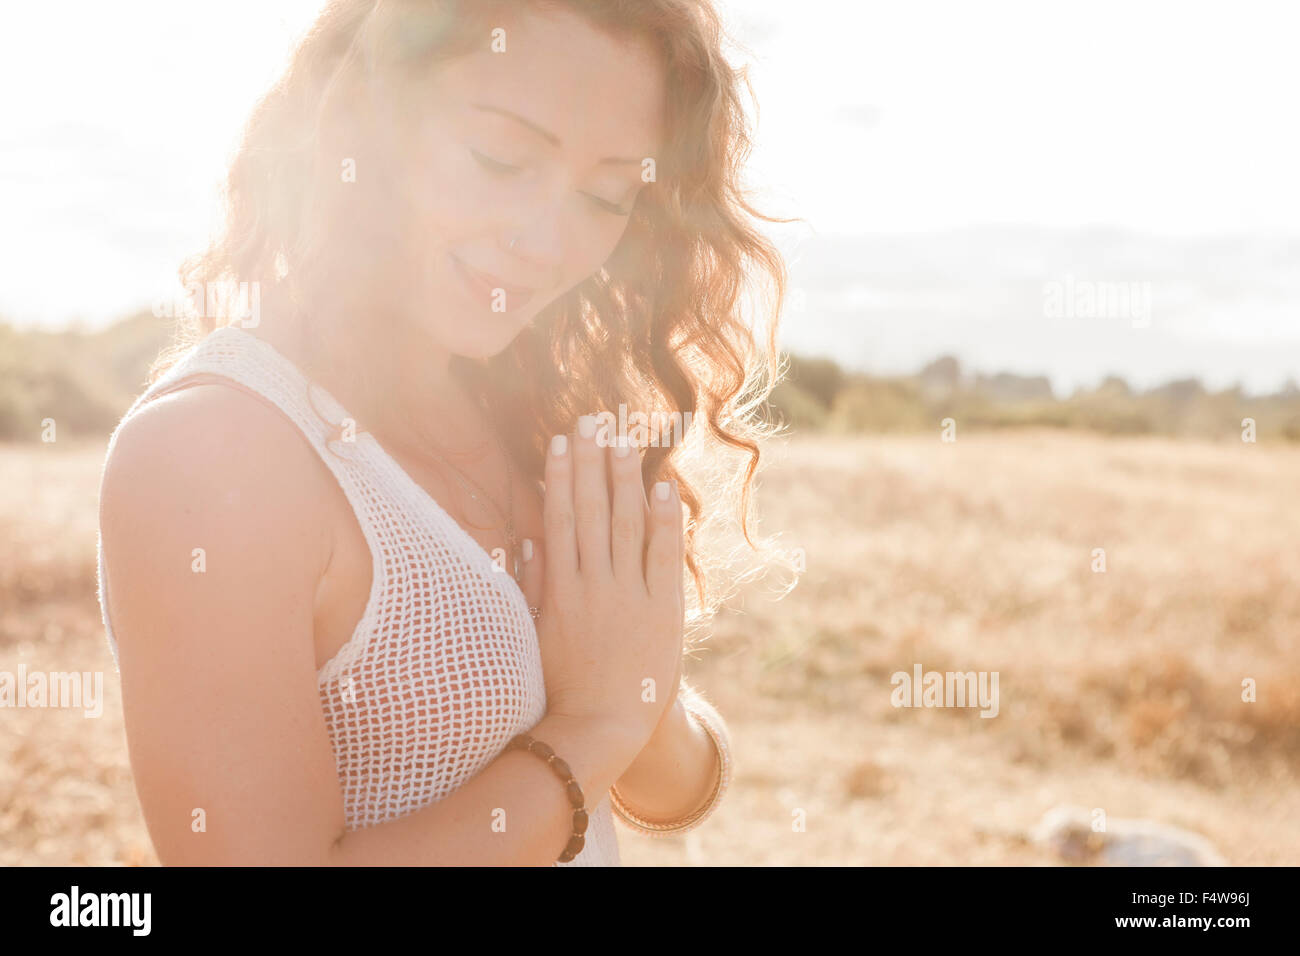 Serene boho woman with hands at heart center in sunny rural field Stock Photo